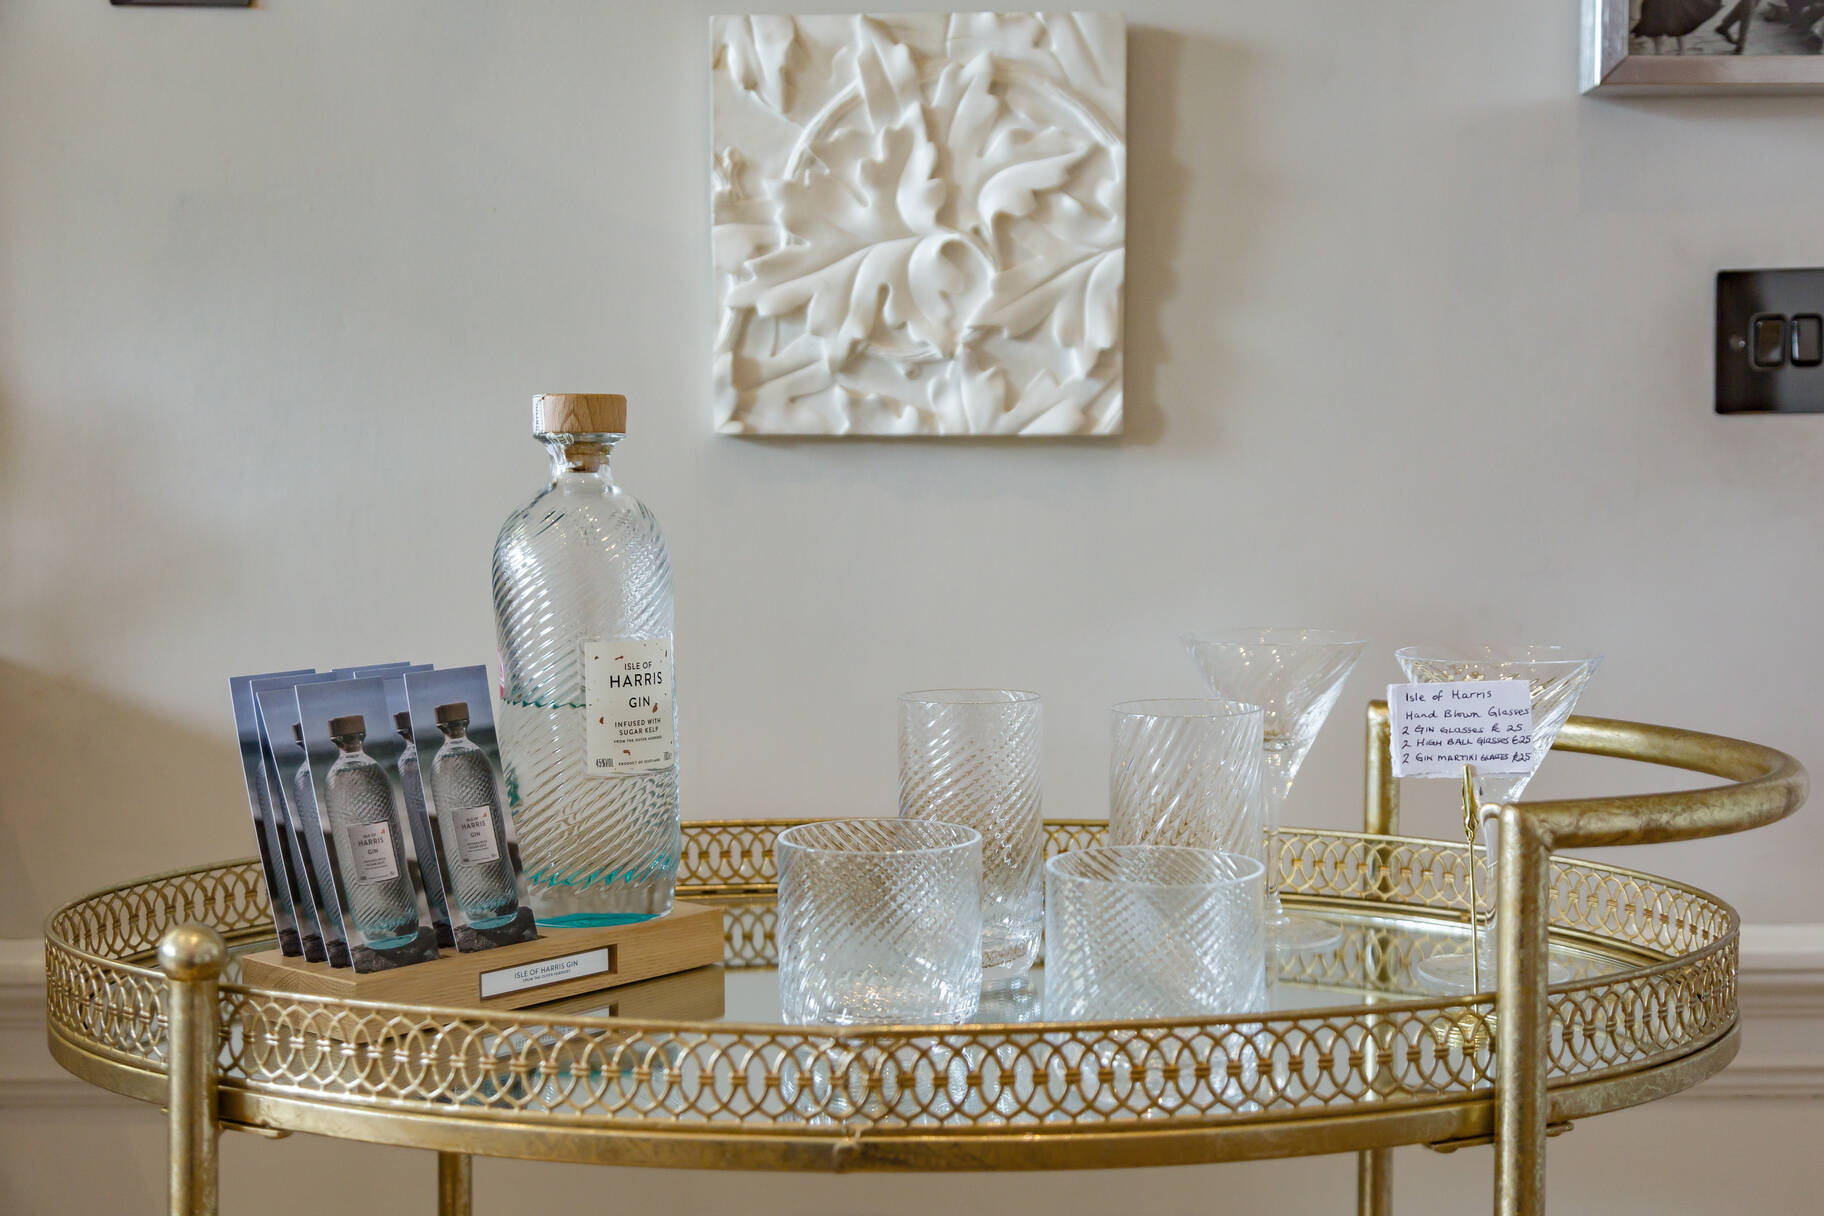 ...always available for a Isle of Harris Gin tasting with guests